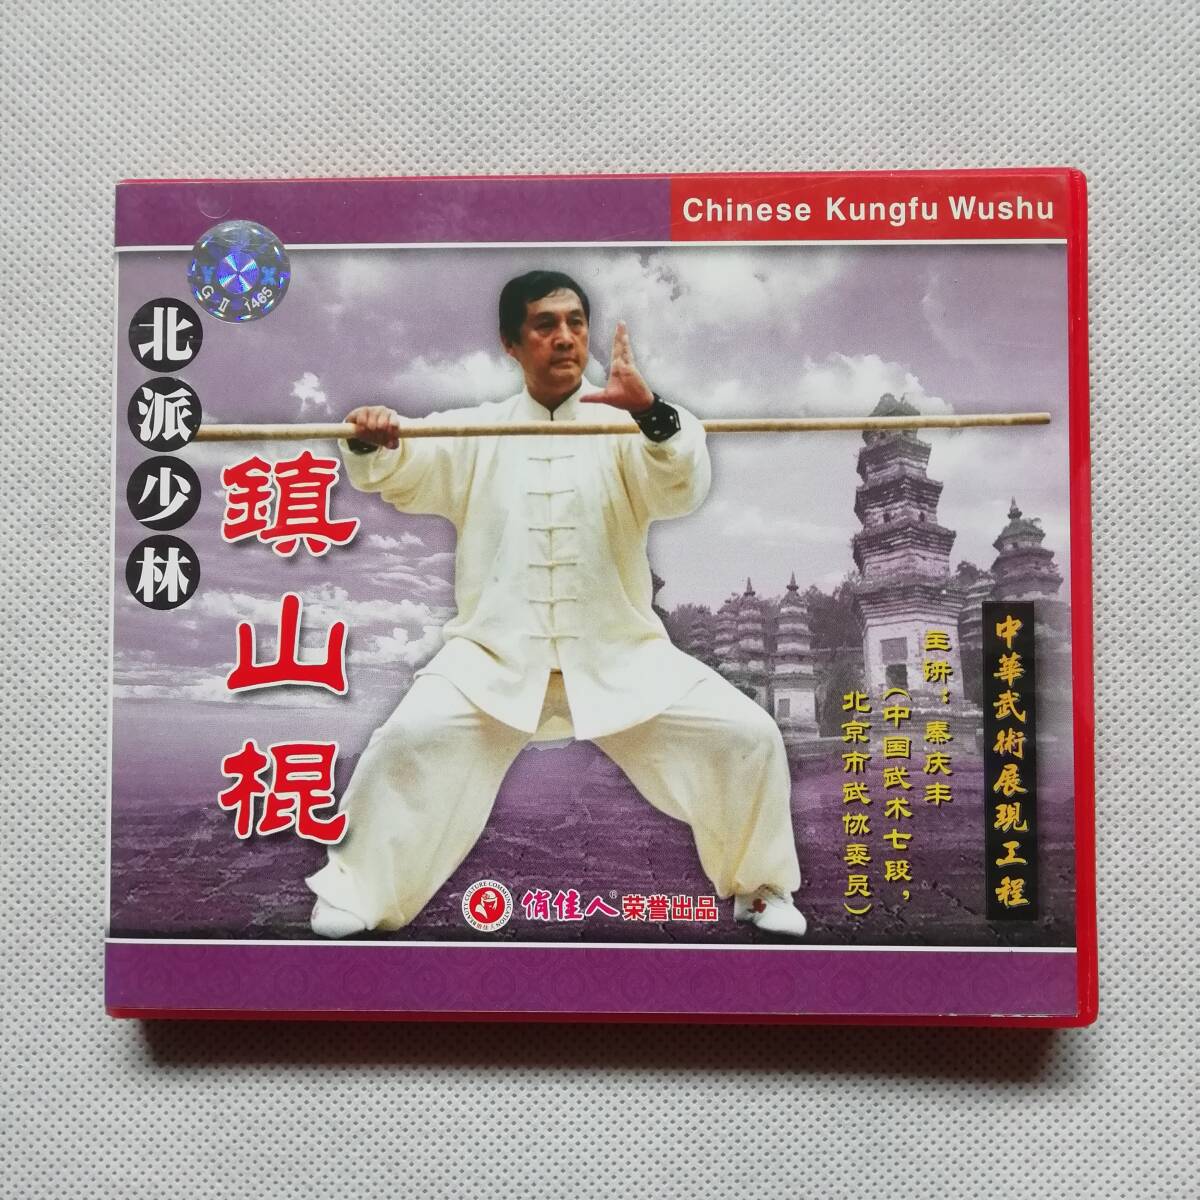  north . little .. mountain . Chinese .. exhibition reality . degree VCD video CD person . physical training sound image publish company China kenpo old .. budo [s200]